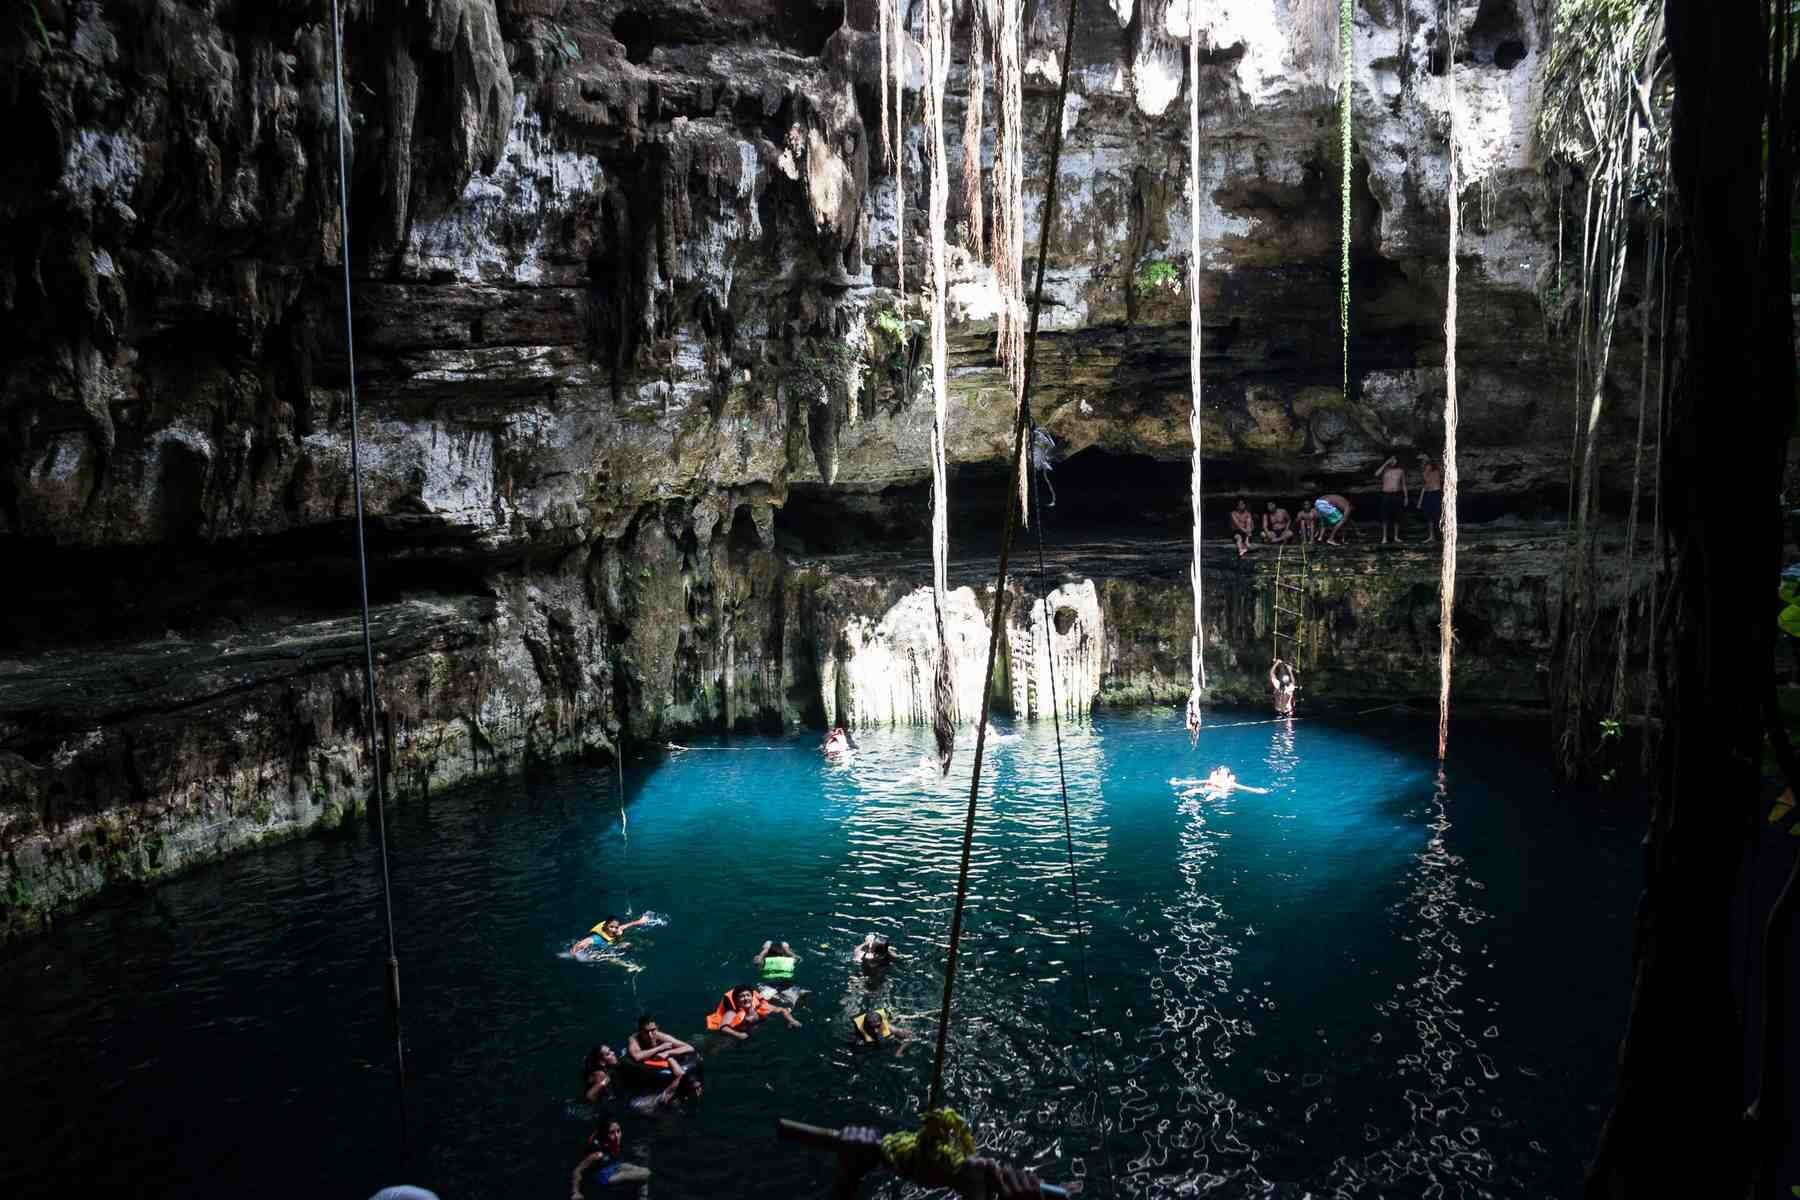  - A cenote is a natural sinkhole in certain areas of the Yucatan peninsula. The origin of the word is from the Yucatec Mayan language—ts’onot. They have been important sources of water for thousands of years. (Photo Credit: Diana Hernandez, Yakanal)